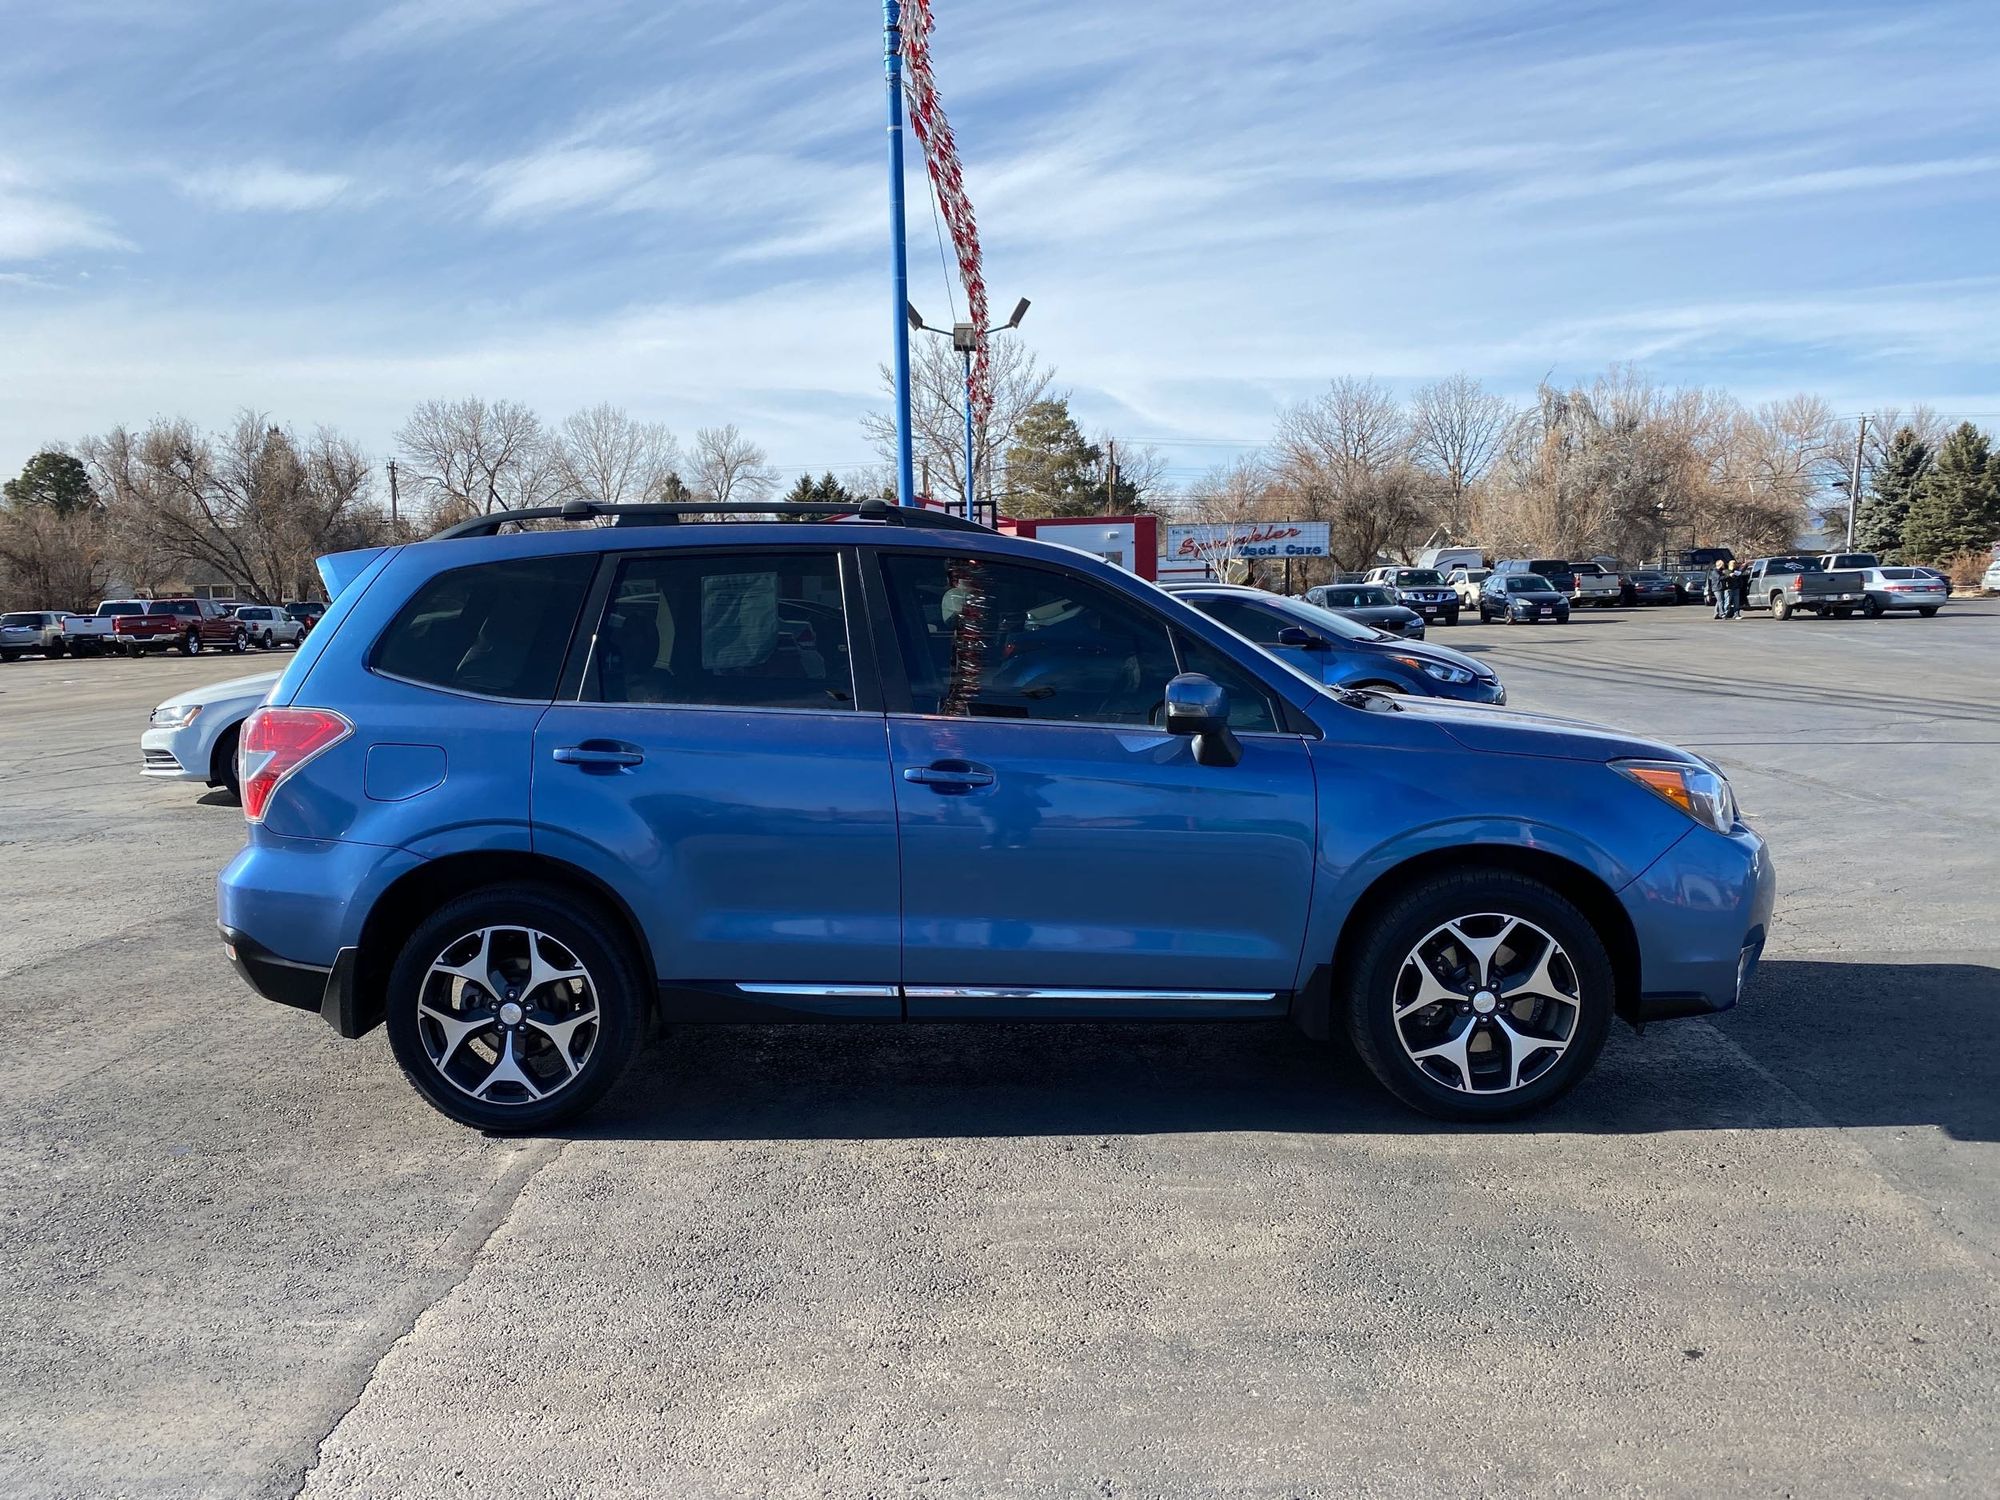 2015 Subaru Forester 2.0XT Touring | Sprinkler Used Cars